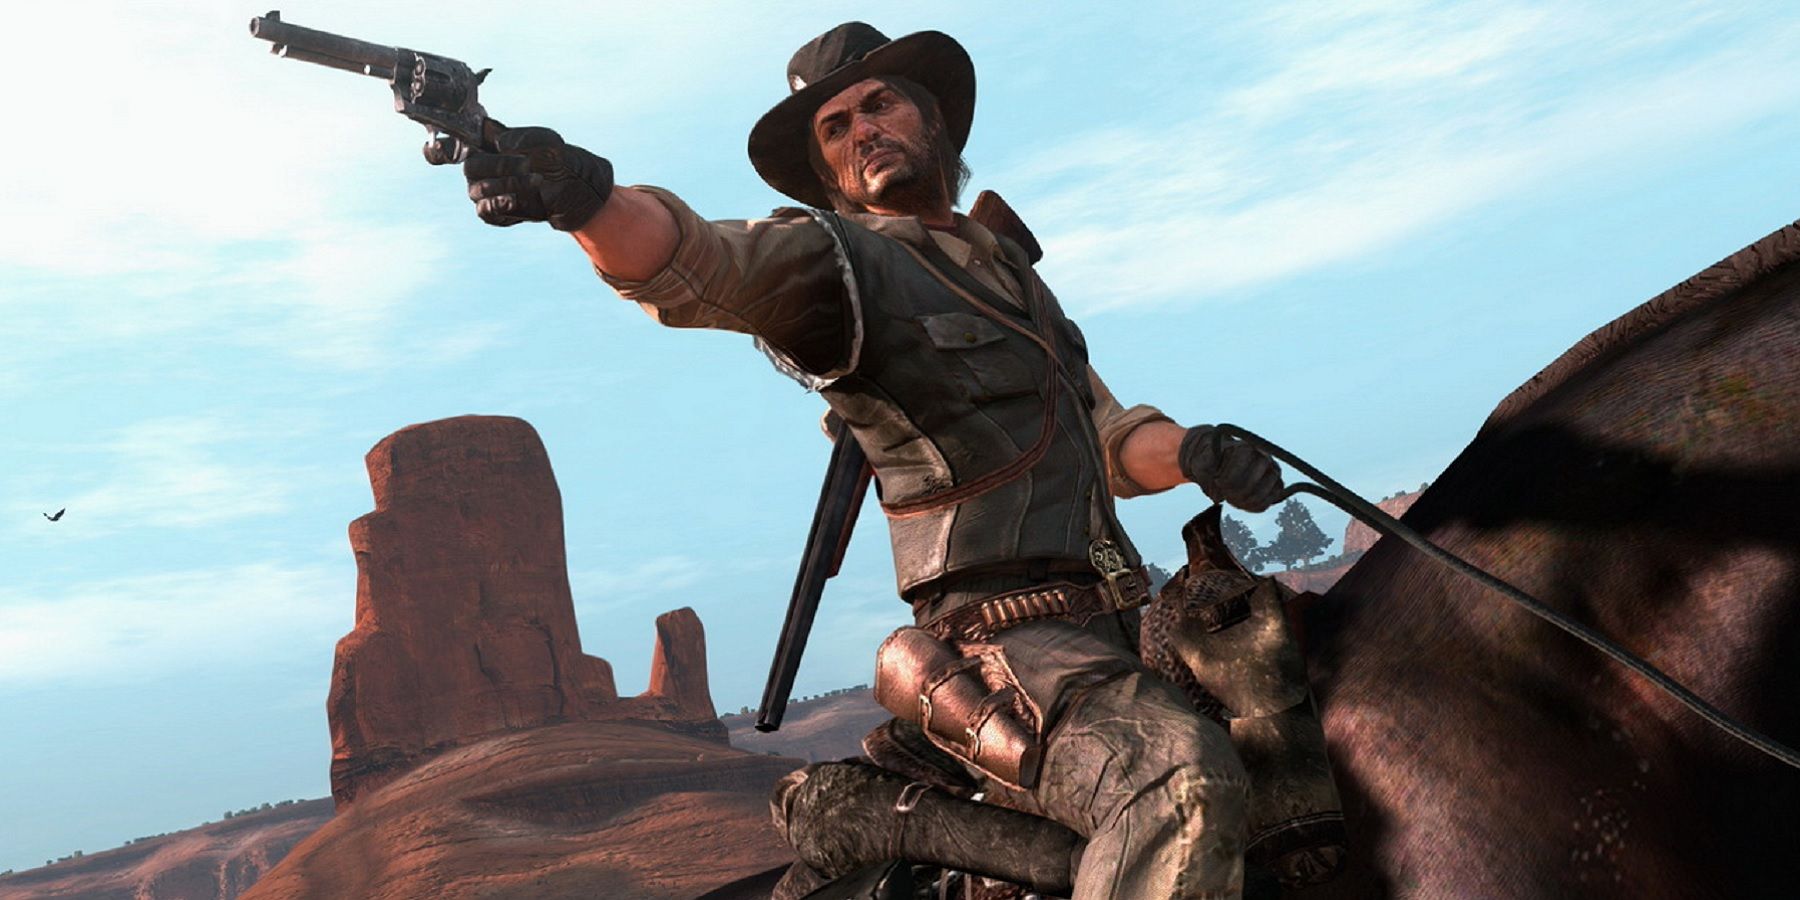 The rumored Red Dead Redemption 'remake' was revealed. It has already been  on Xbox for years, and people aren't happy.